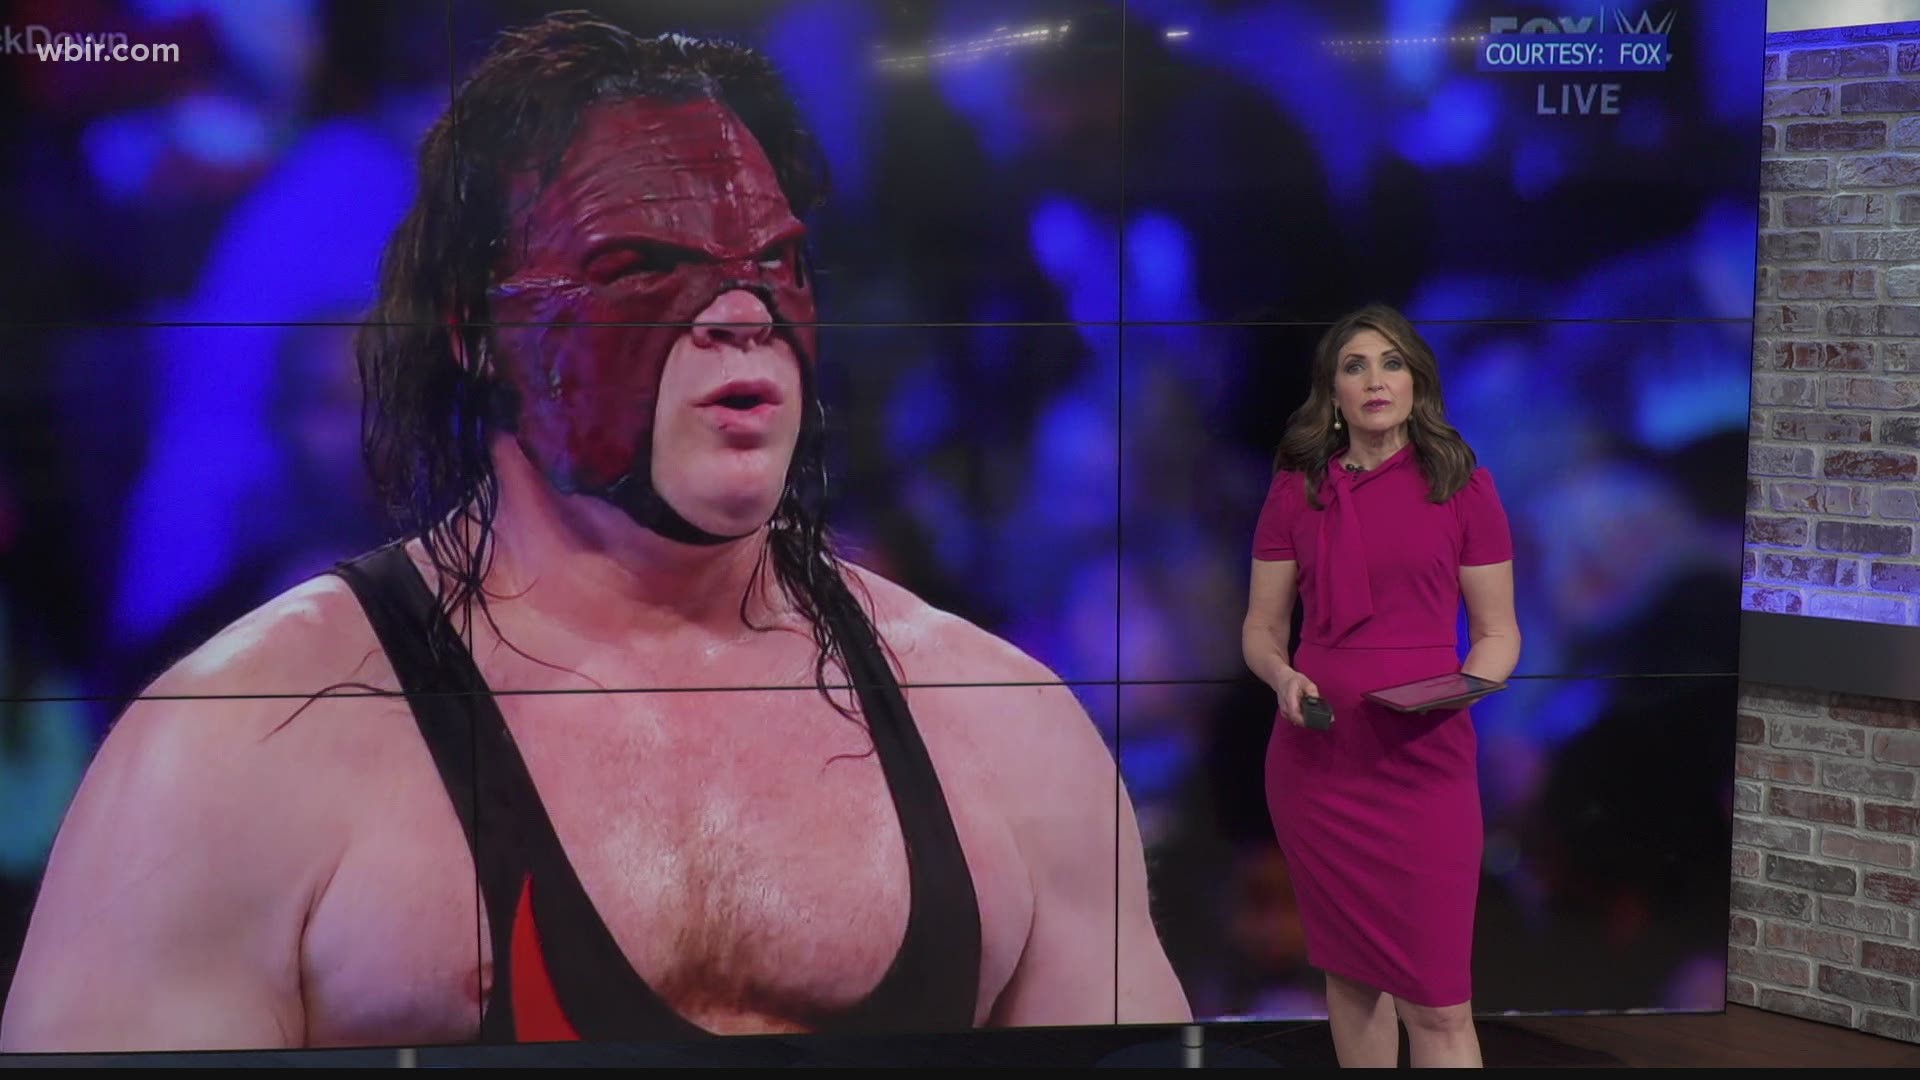 A new legislative effort calls for honoring Knox County mayor Glenn Jacobs and his wrestling persona "Kane" ahead of his induction into the WWE Hall of Fame.